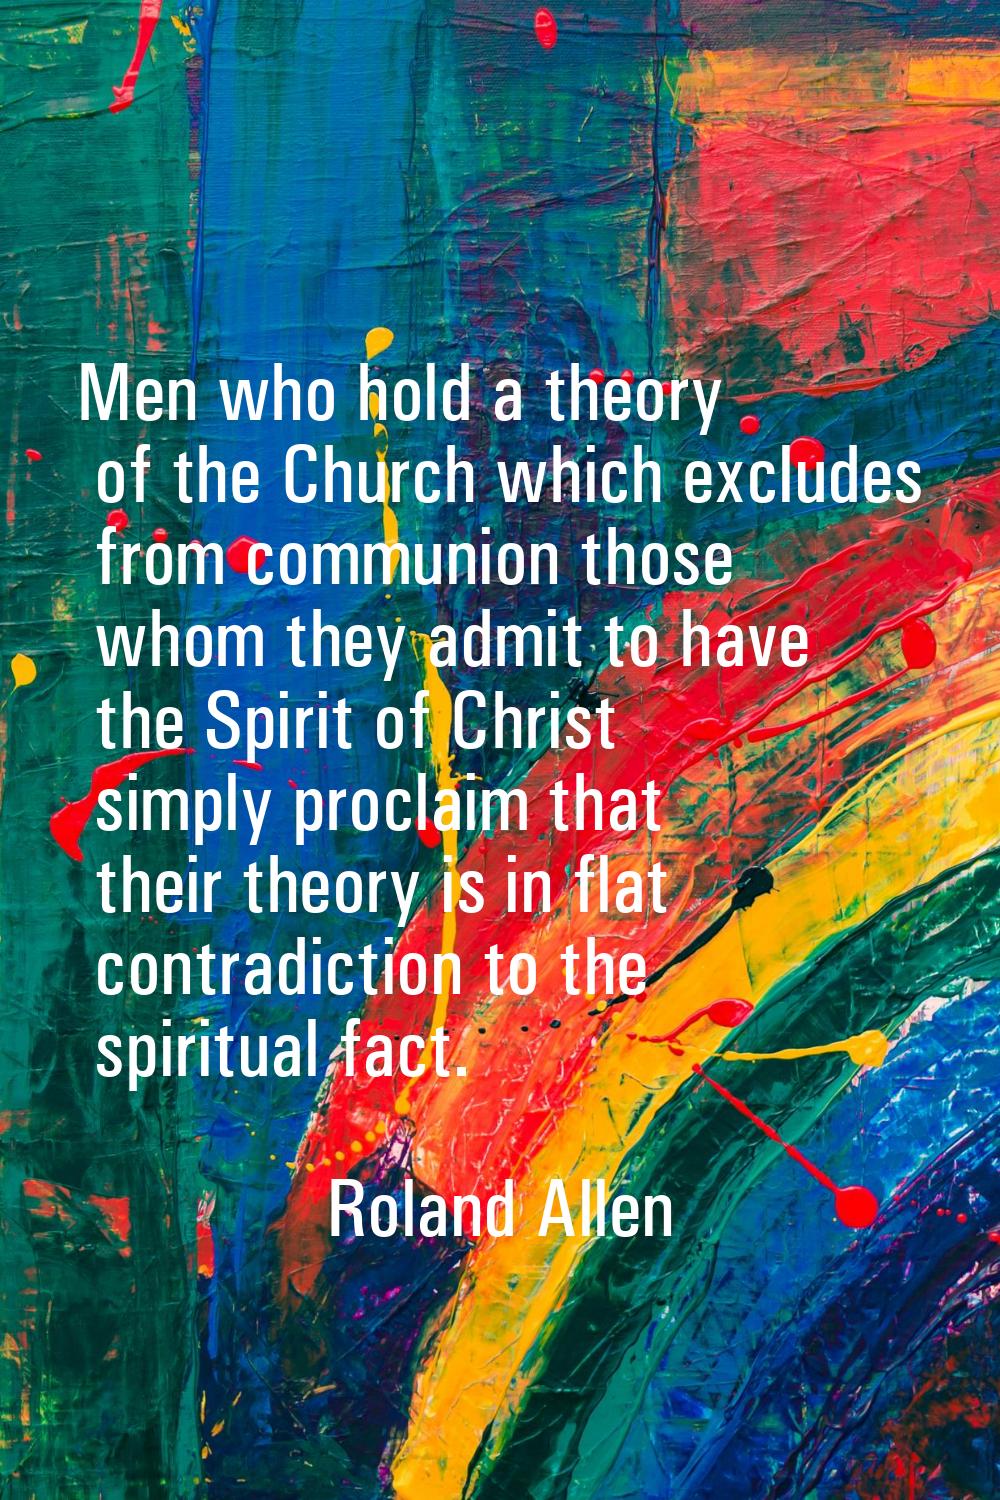 Men who hold a theory of the Church which excludes from communion those whom they admit to have the